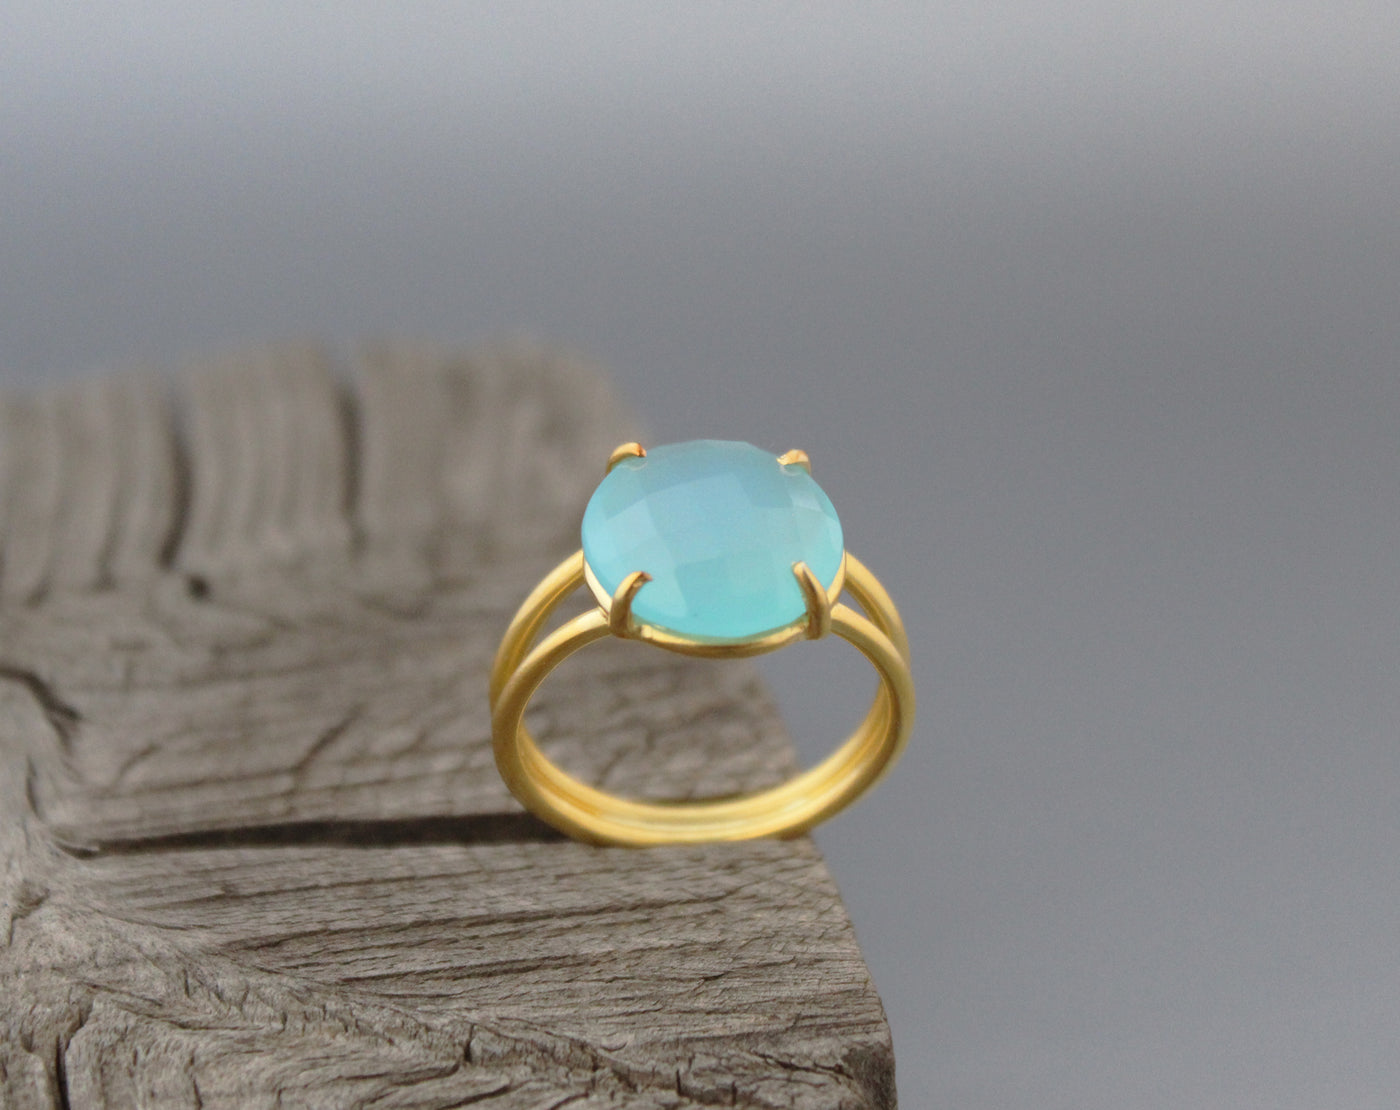 Aqua Chalcedony Ring ,Statement Rings,Stackable Rings,Chalcedony , rose Gold Ring, rings for Women,Blue Ring, Aqua Ring, Proposal Ring